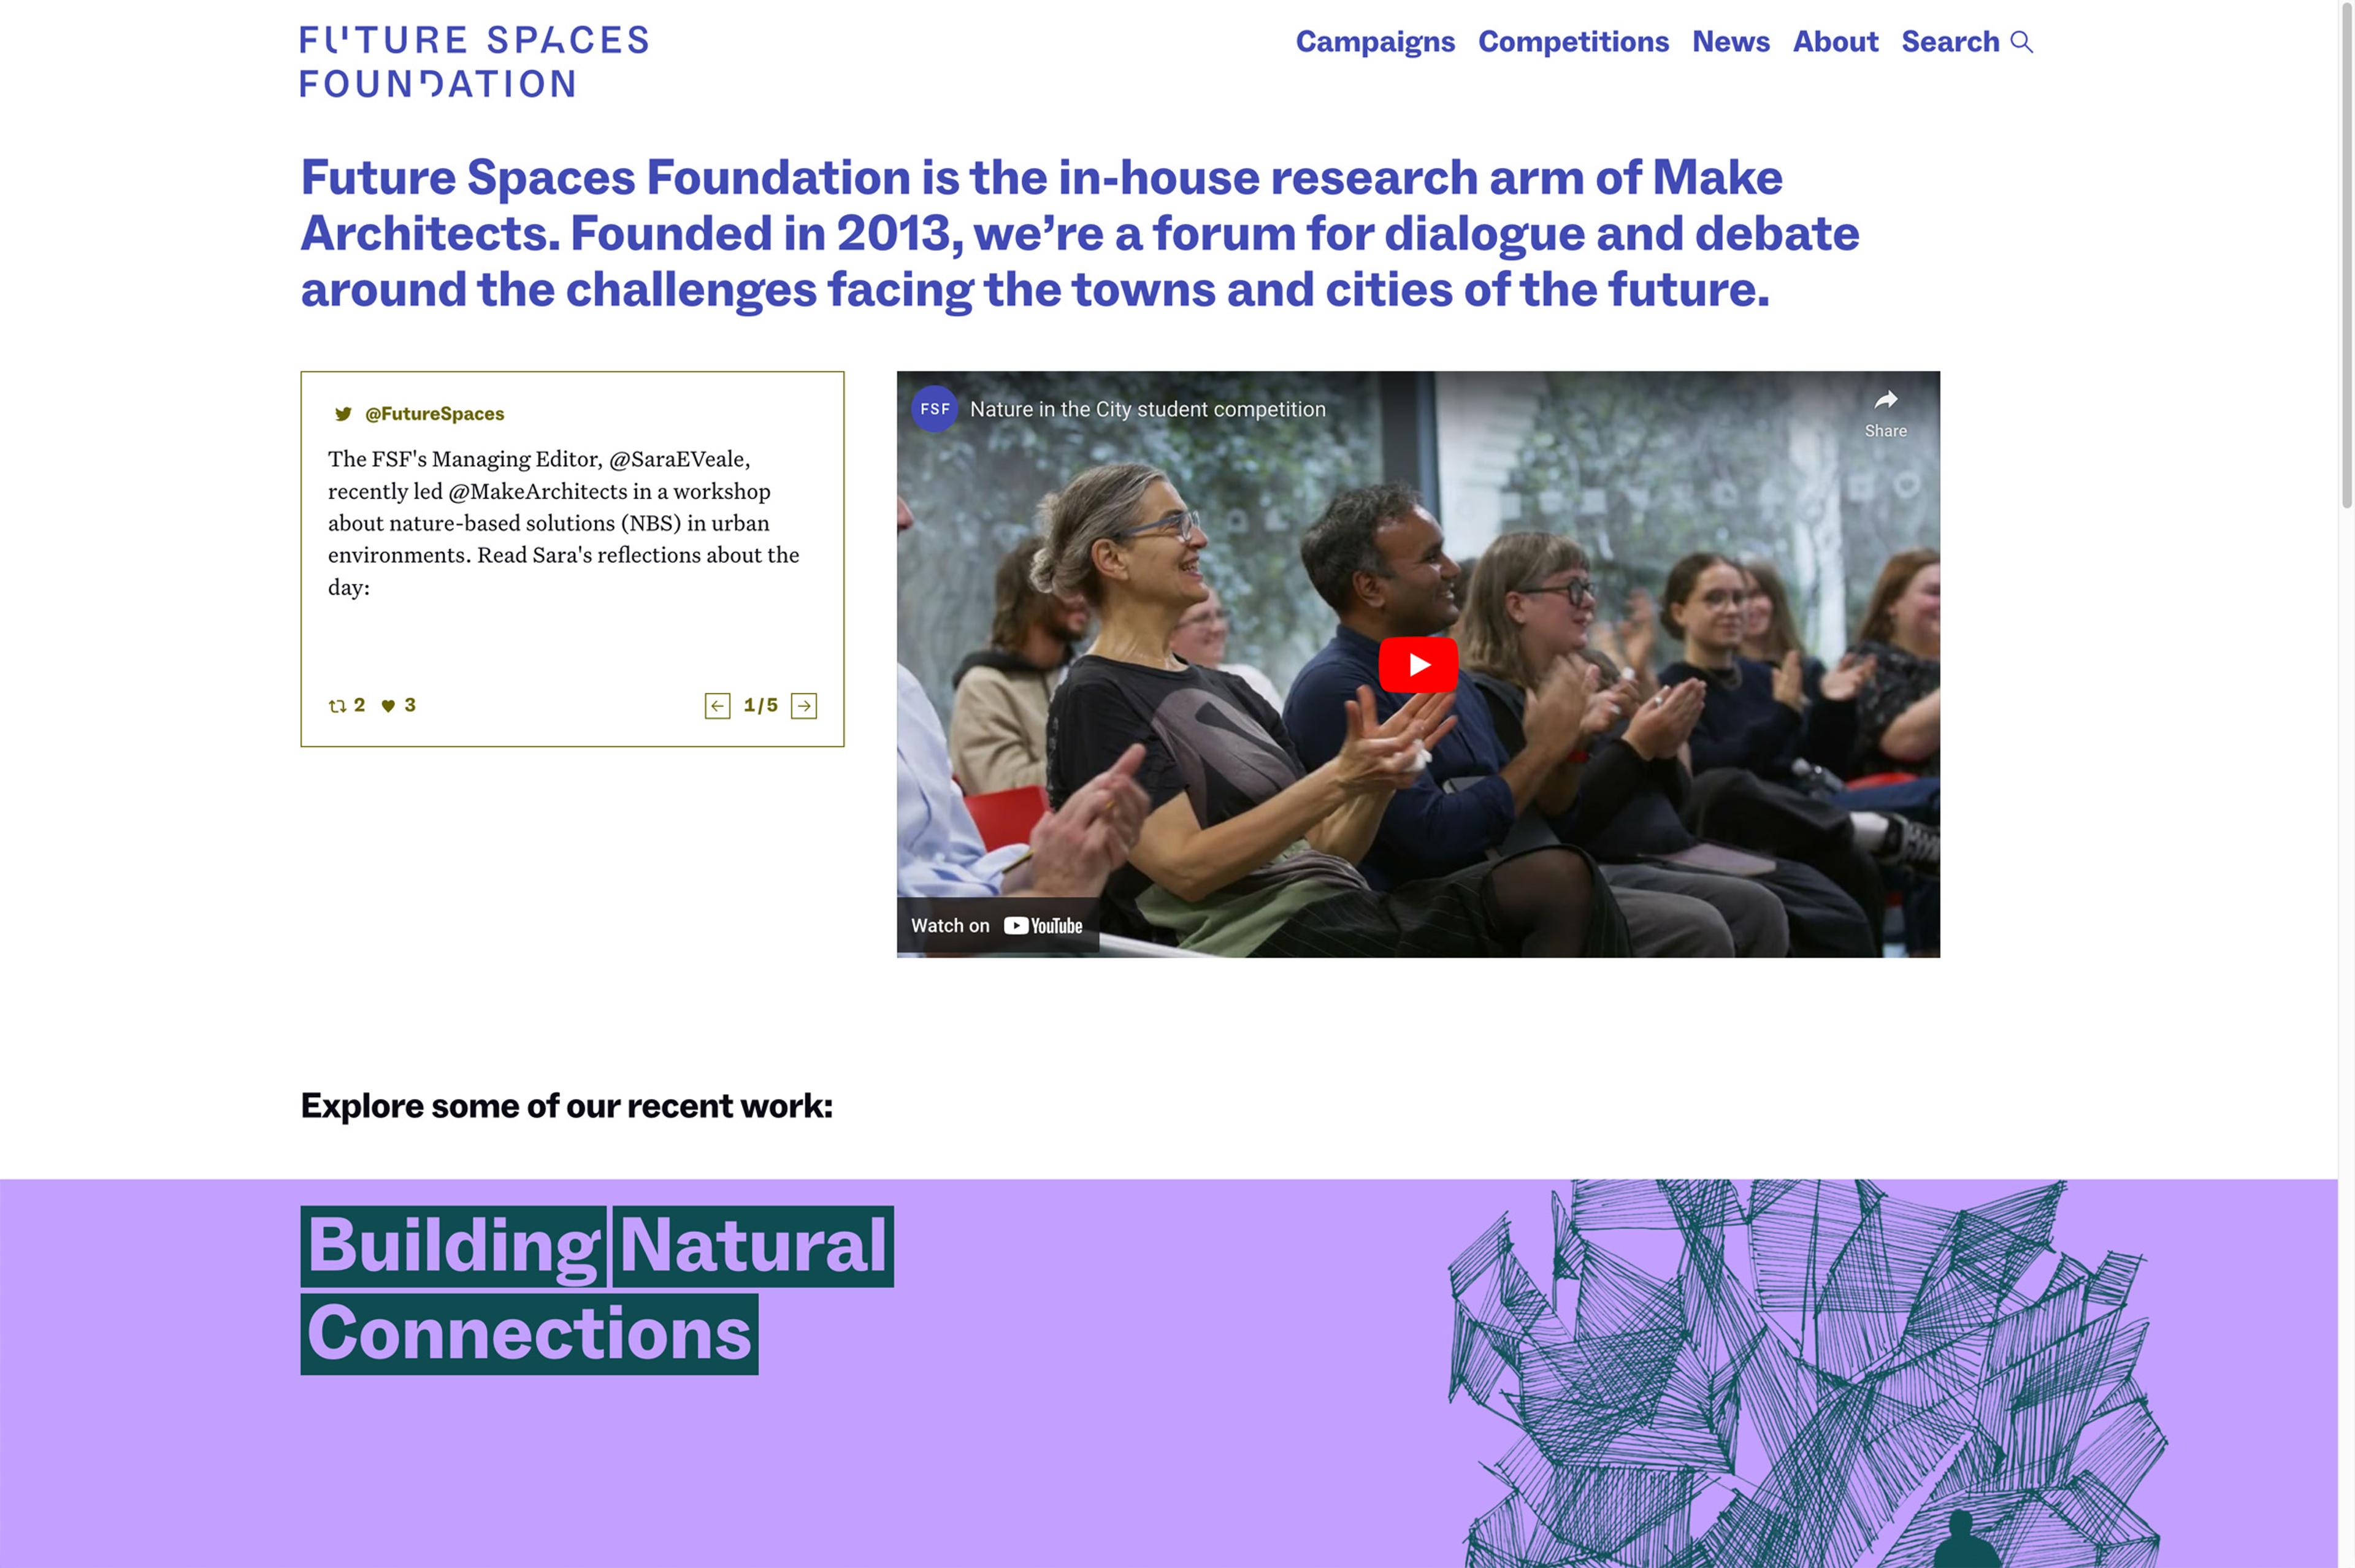 A screengrab of the Future Spaces Foundation website front page, including a custom Twitter component and Youtube embed